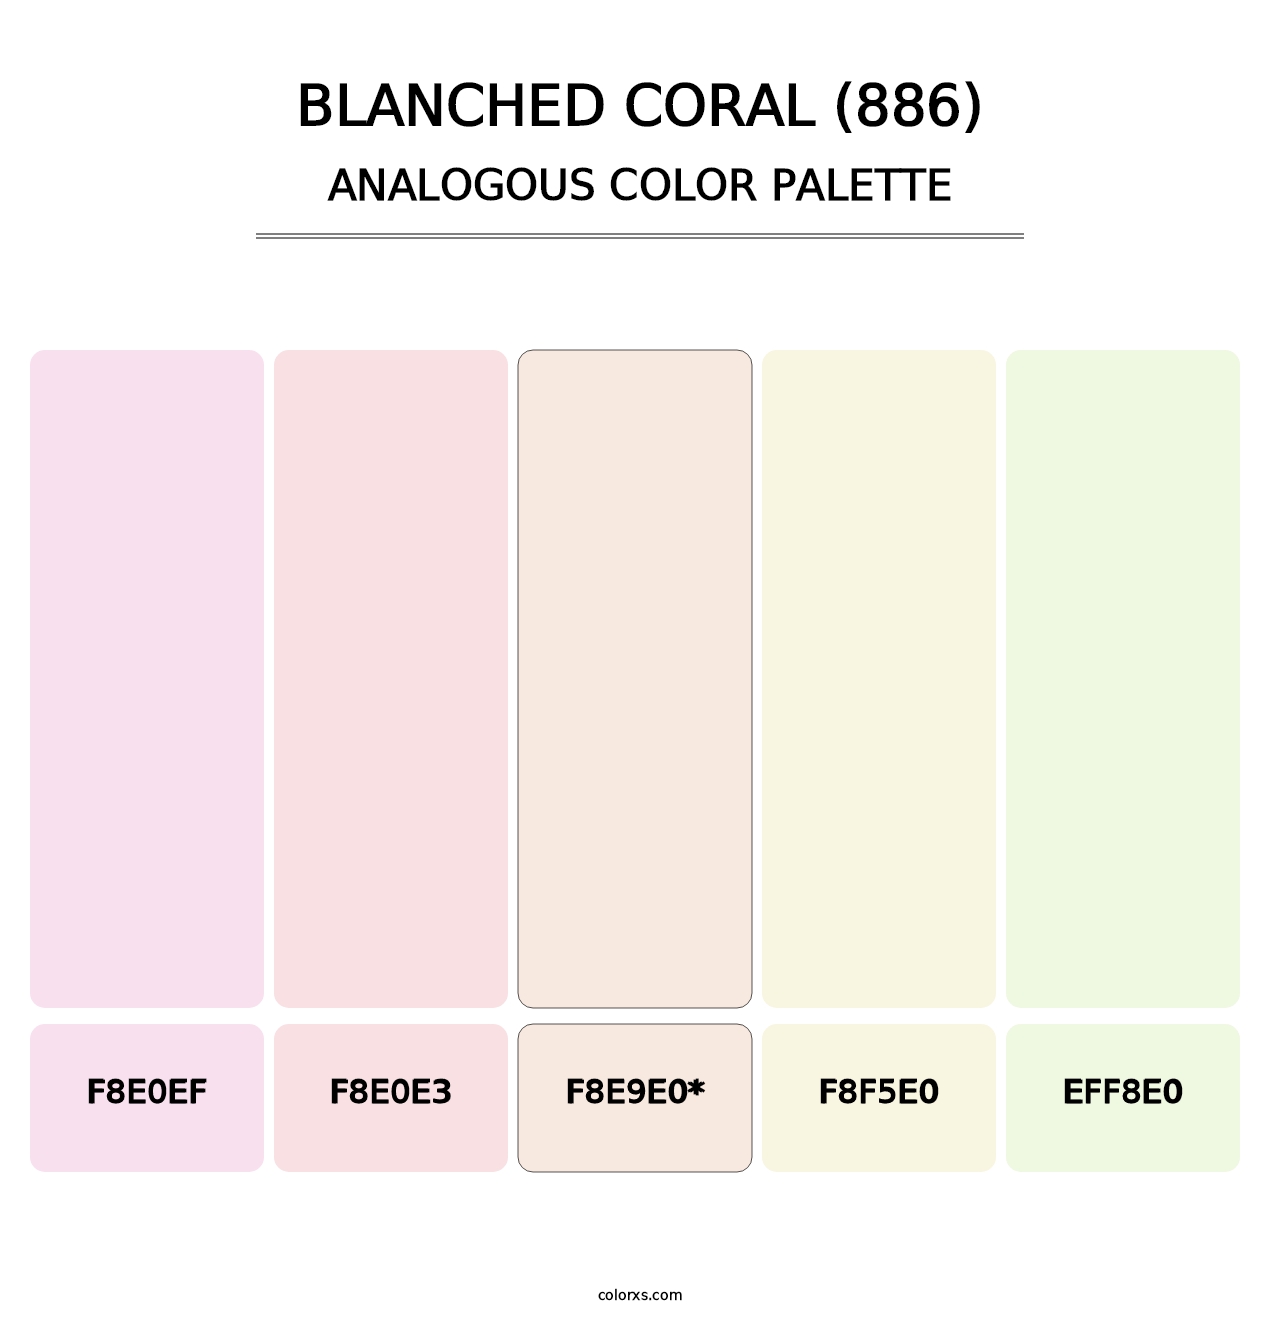 Blanched Coral (886) - Analogous Color Palette